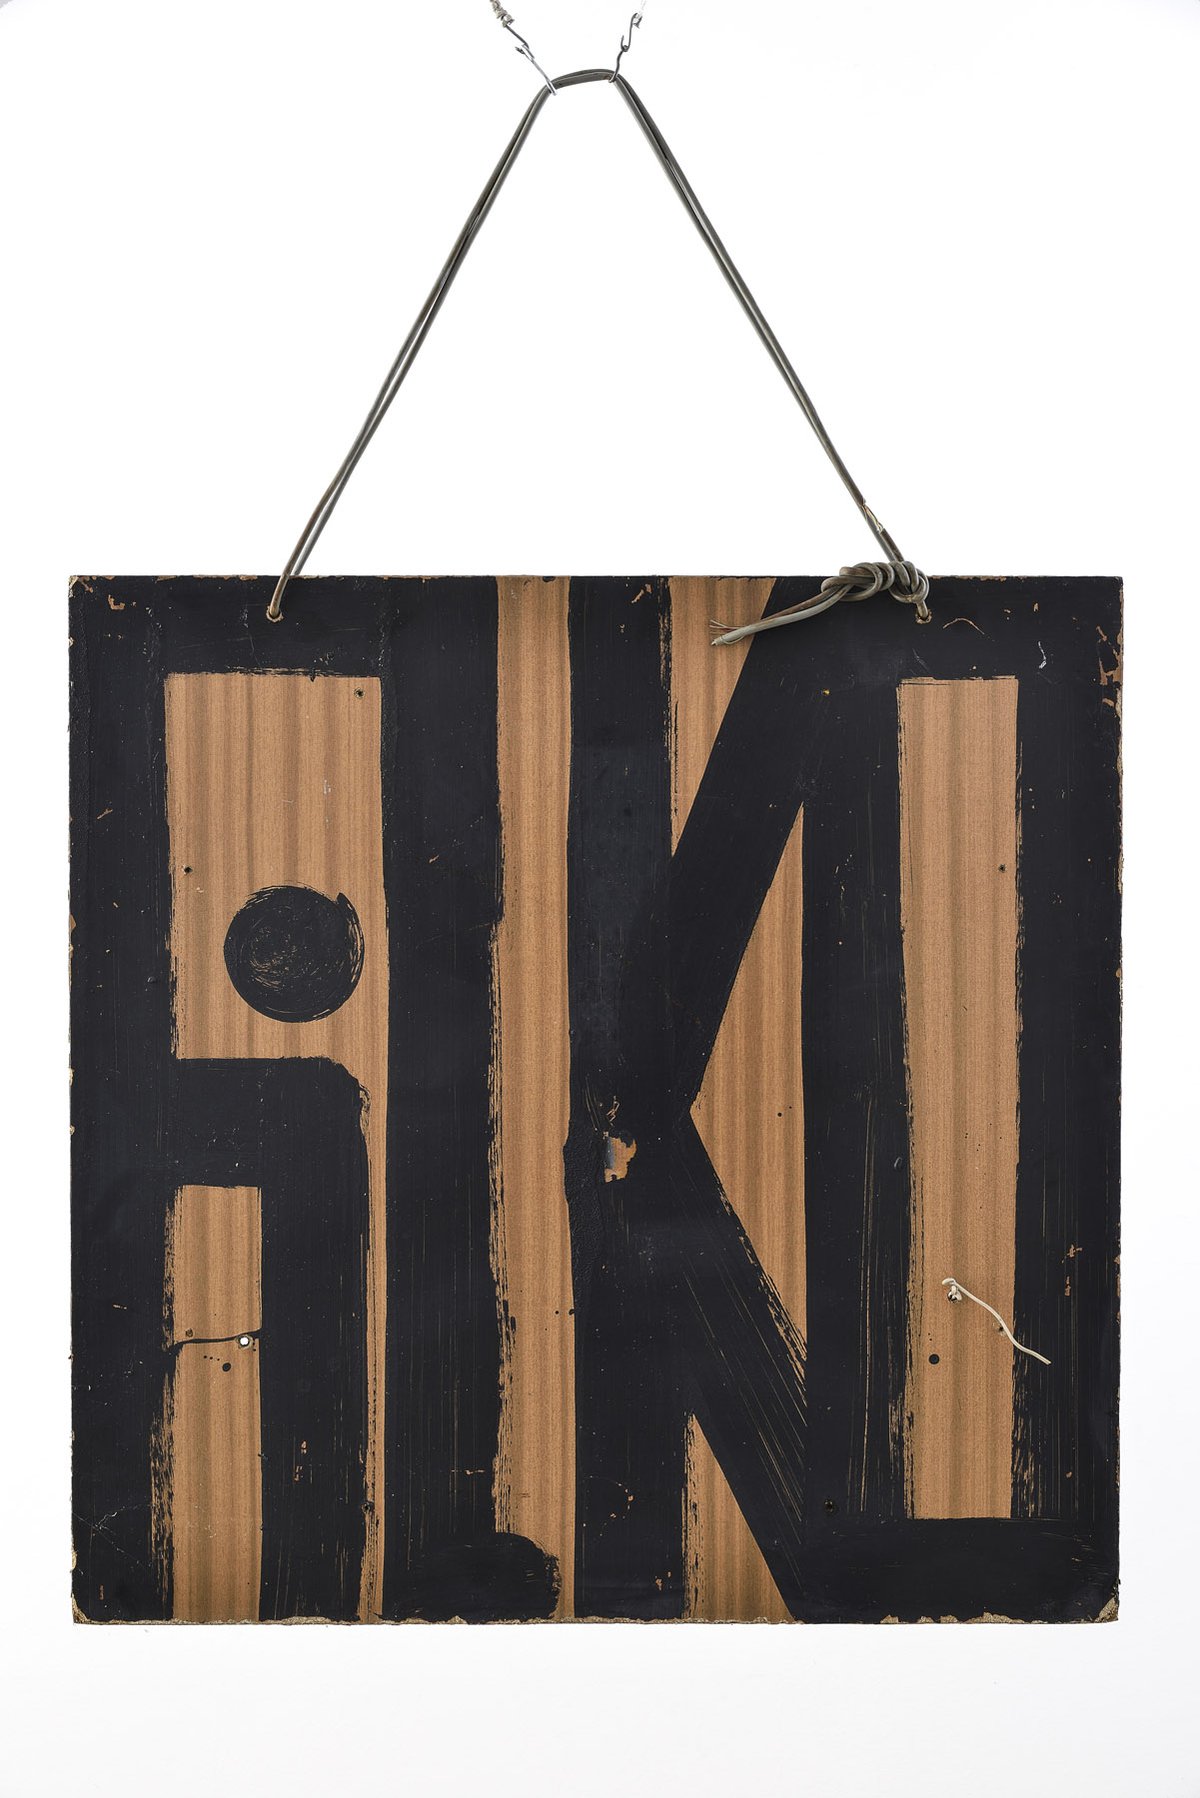 Stano FilkoFrom the series FiLKO EGO, 1995Mixed media, plywood, cord80 x 80 x 2 cm